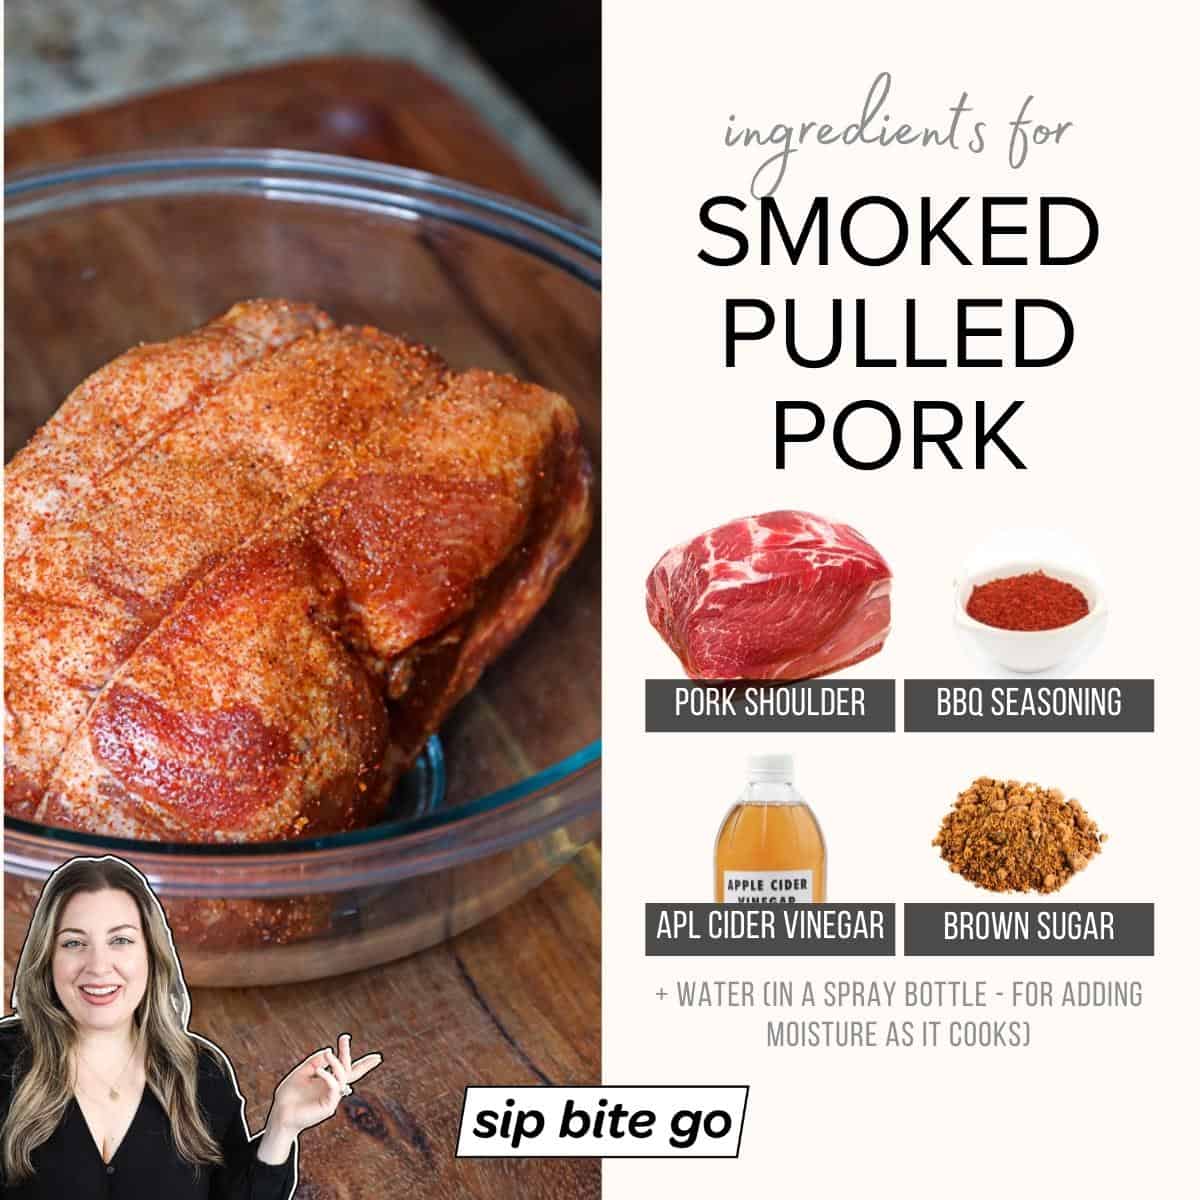 Infographic chart with ingredients for Smoked Pulled Pork with captions